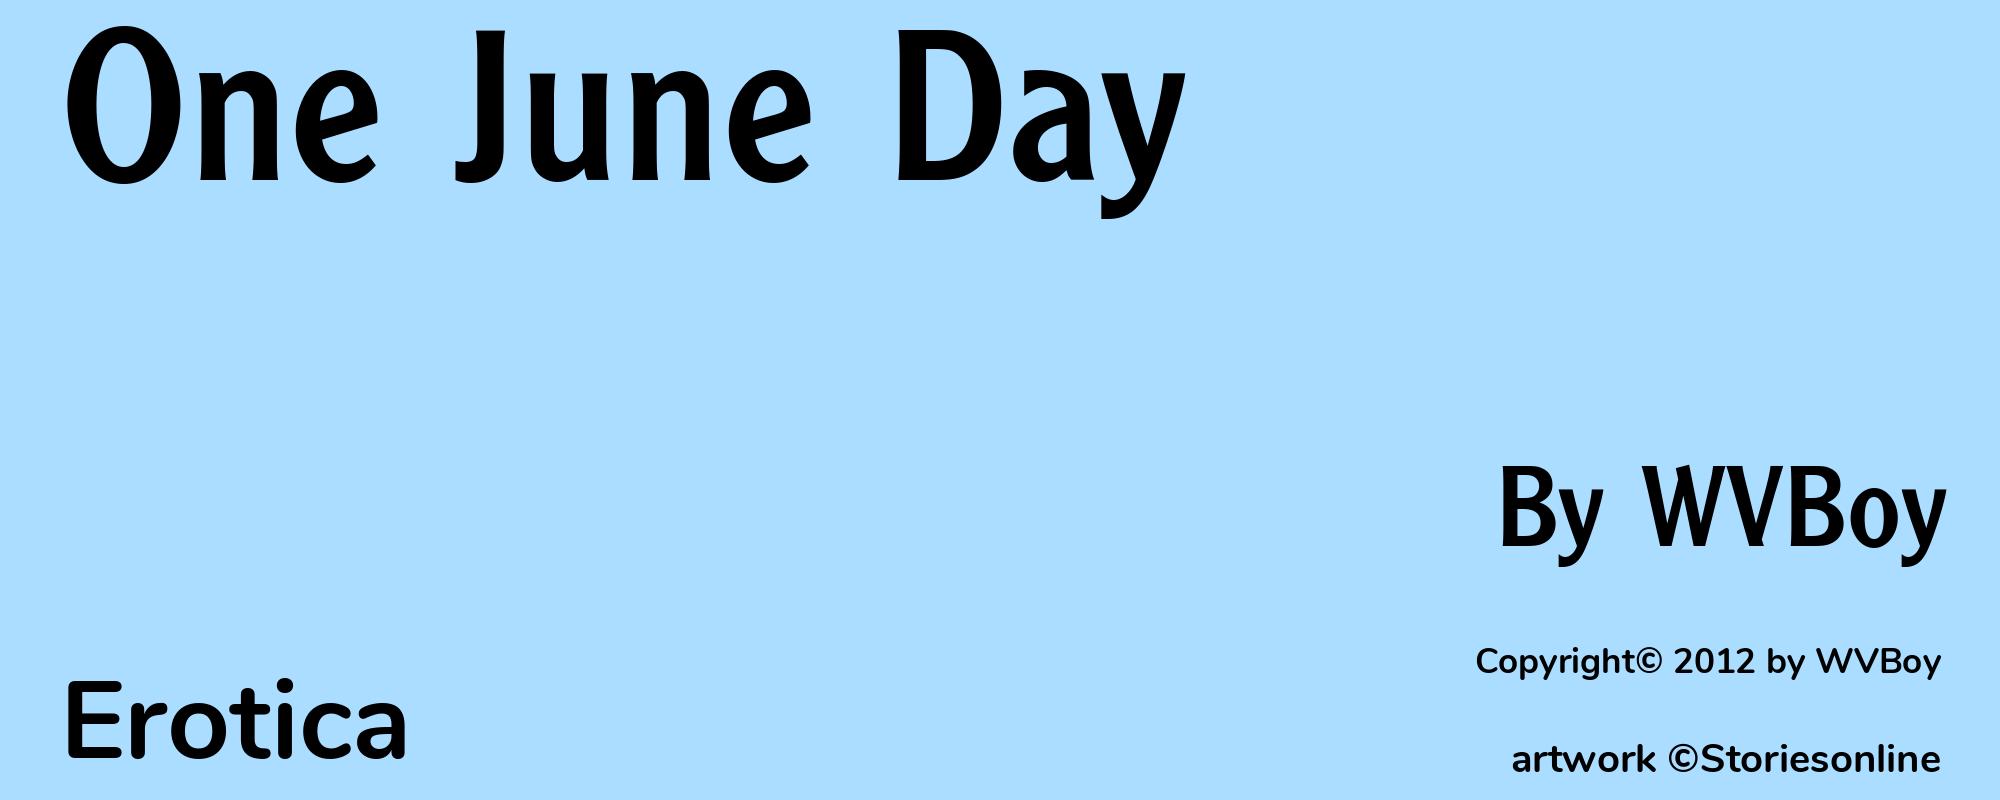 One June Day - Cover